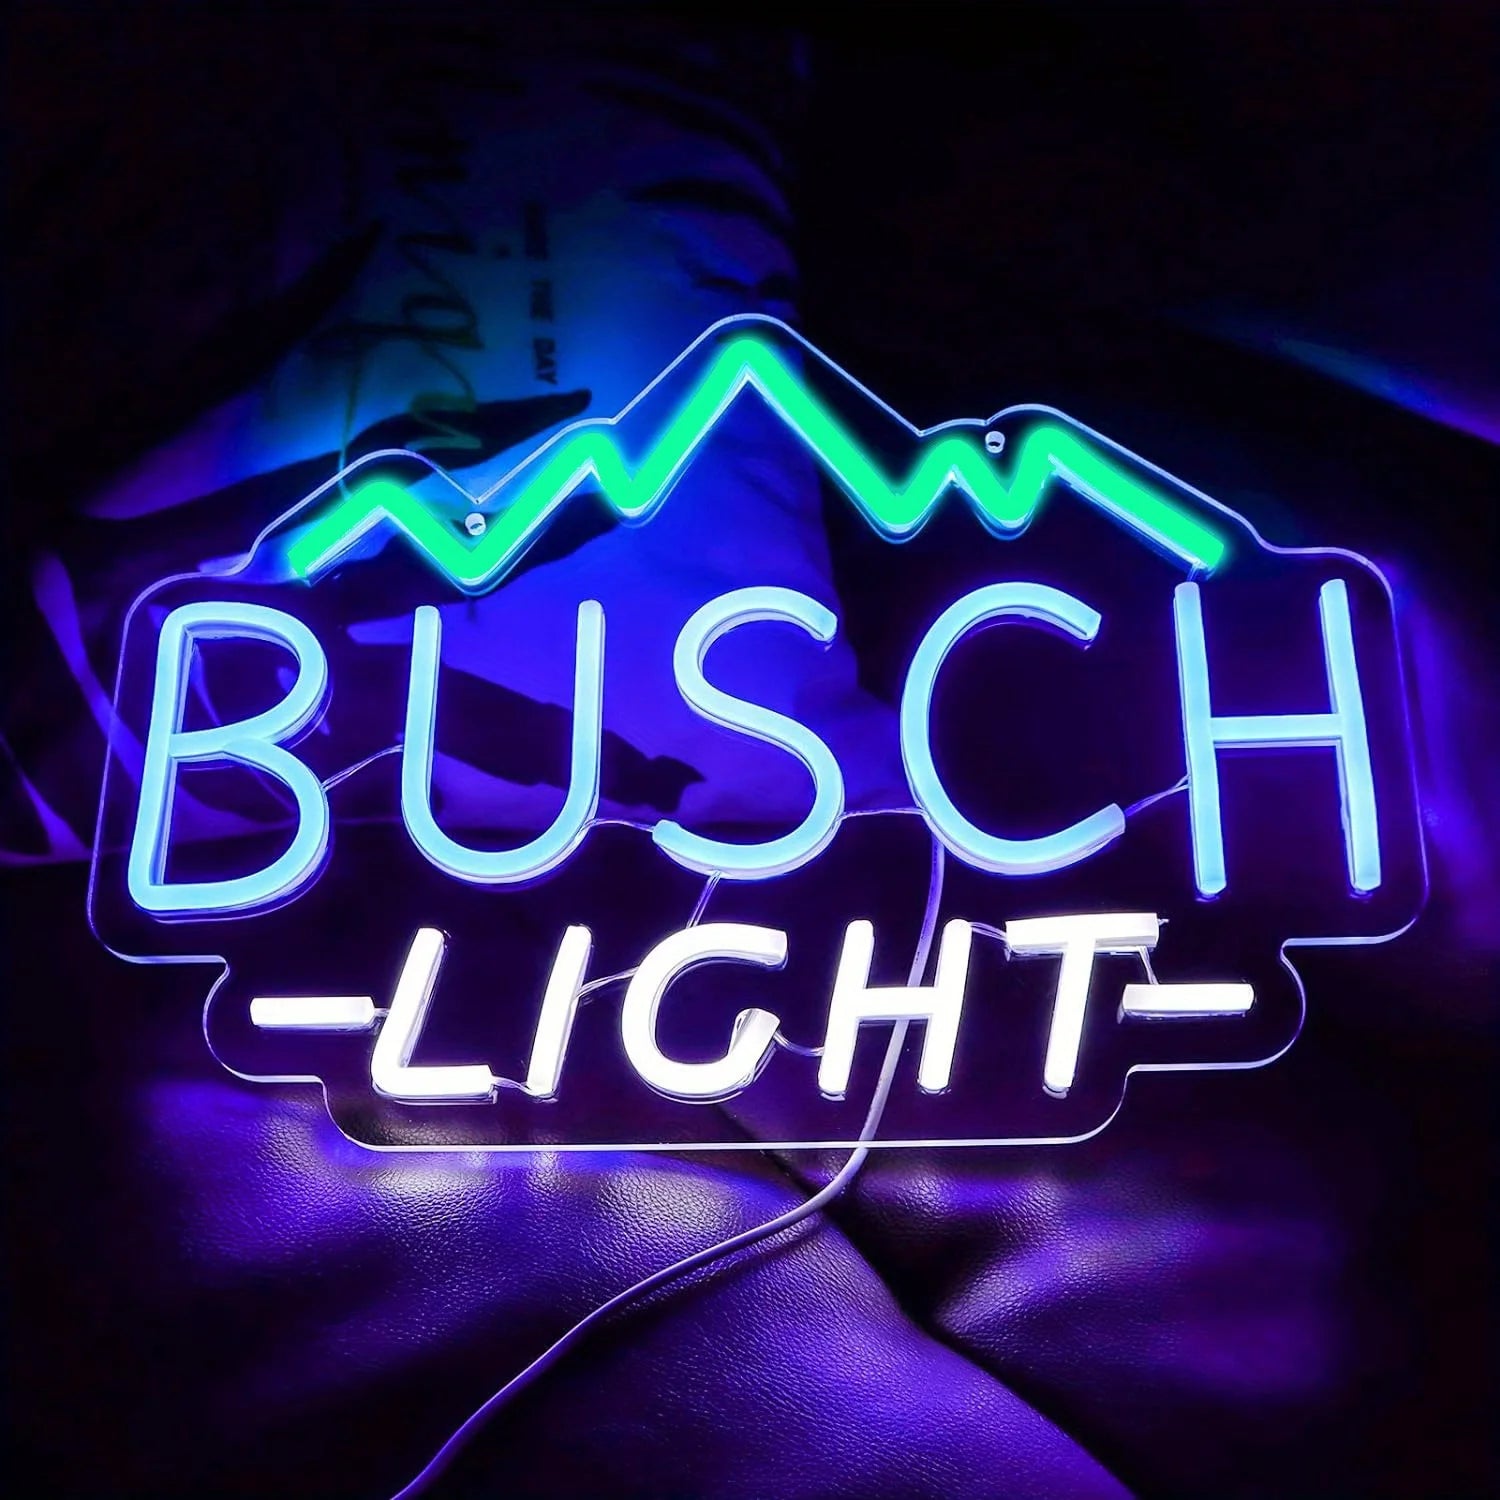 Beer Neon Signs for Wall Decor USB Powered Neon Lights for Bedroom Bar Restaurant Decor Neon Sign for Man Cave Beer Bar Pub Gift